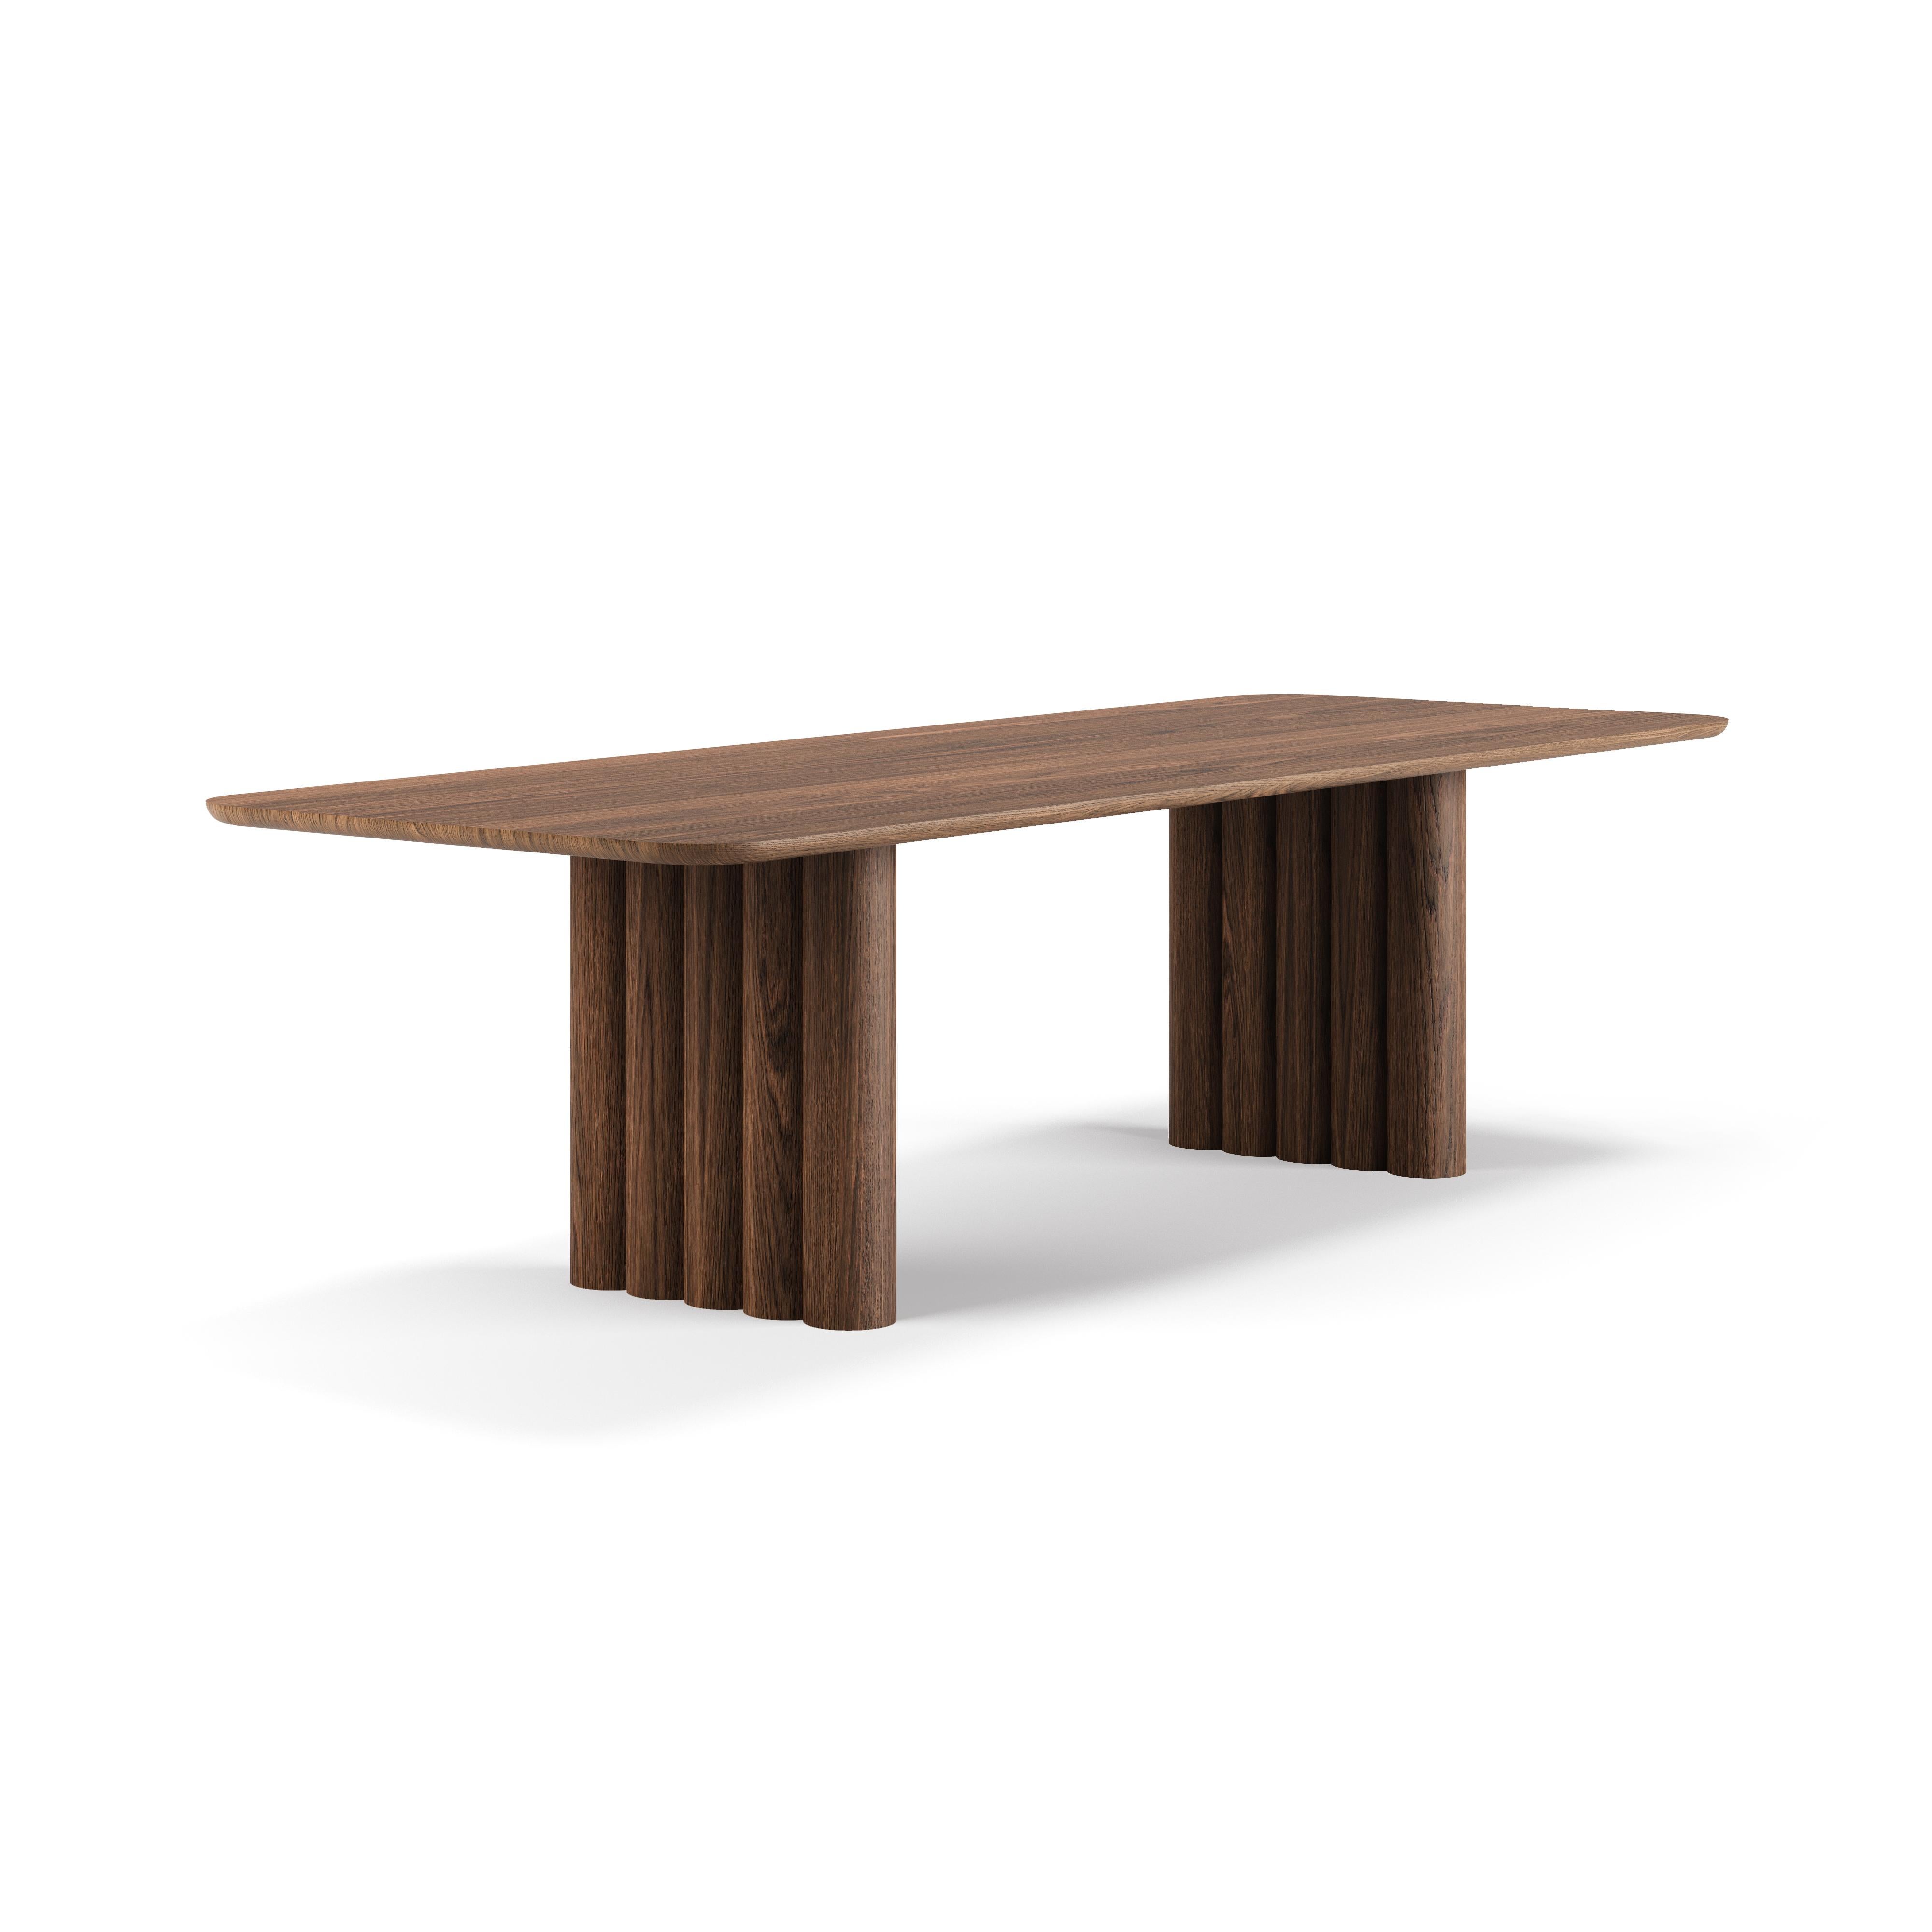 Scandinavian Modern Contemporary Dining Table 'Plush' by Dk3, Smoked Oak or Walnut, 340, Rectangular For Sale